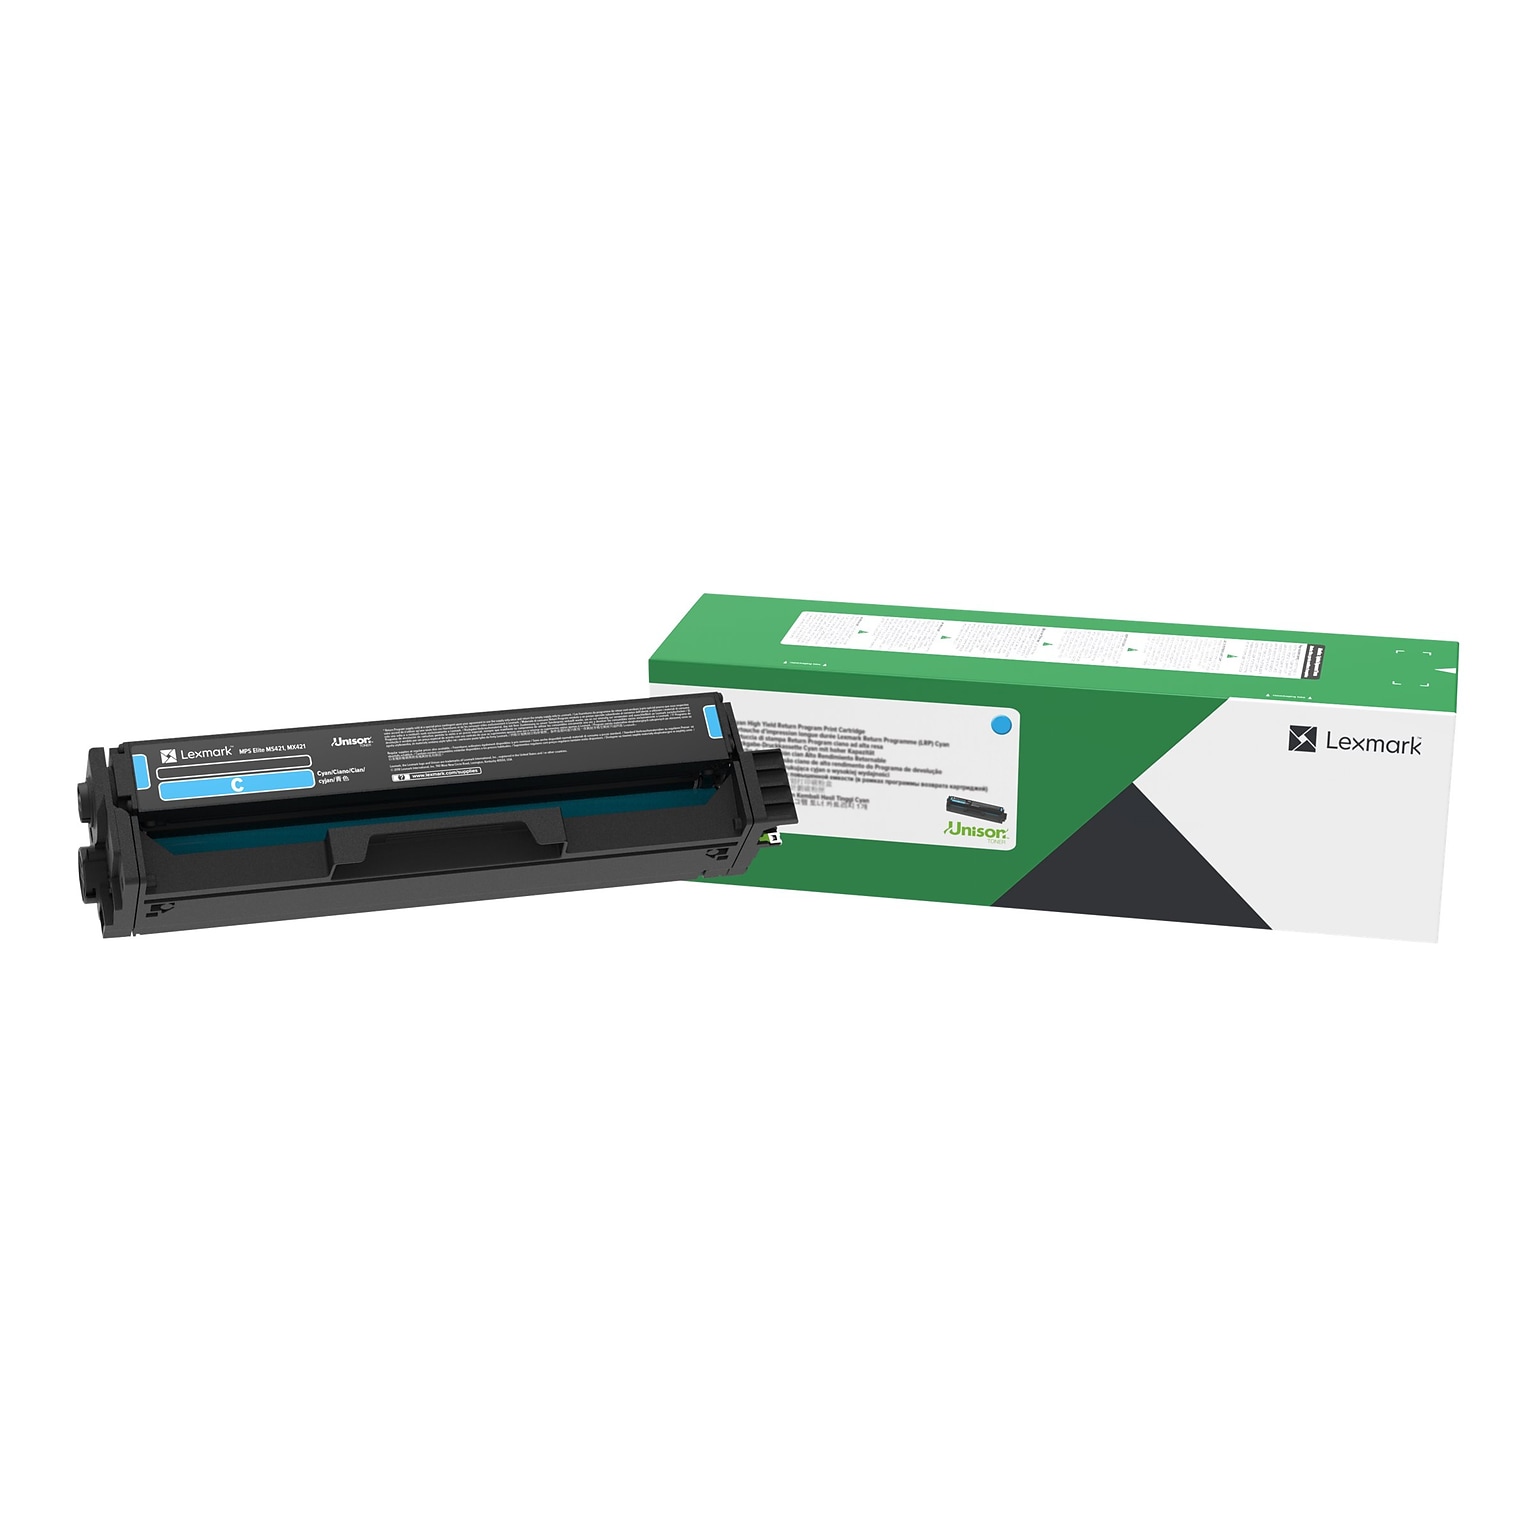 Lexmark C3210C0 Cyan Standard Yield Toner Cartridge, Prints Up to 1,500 Pages